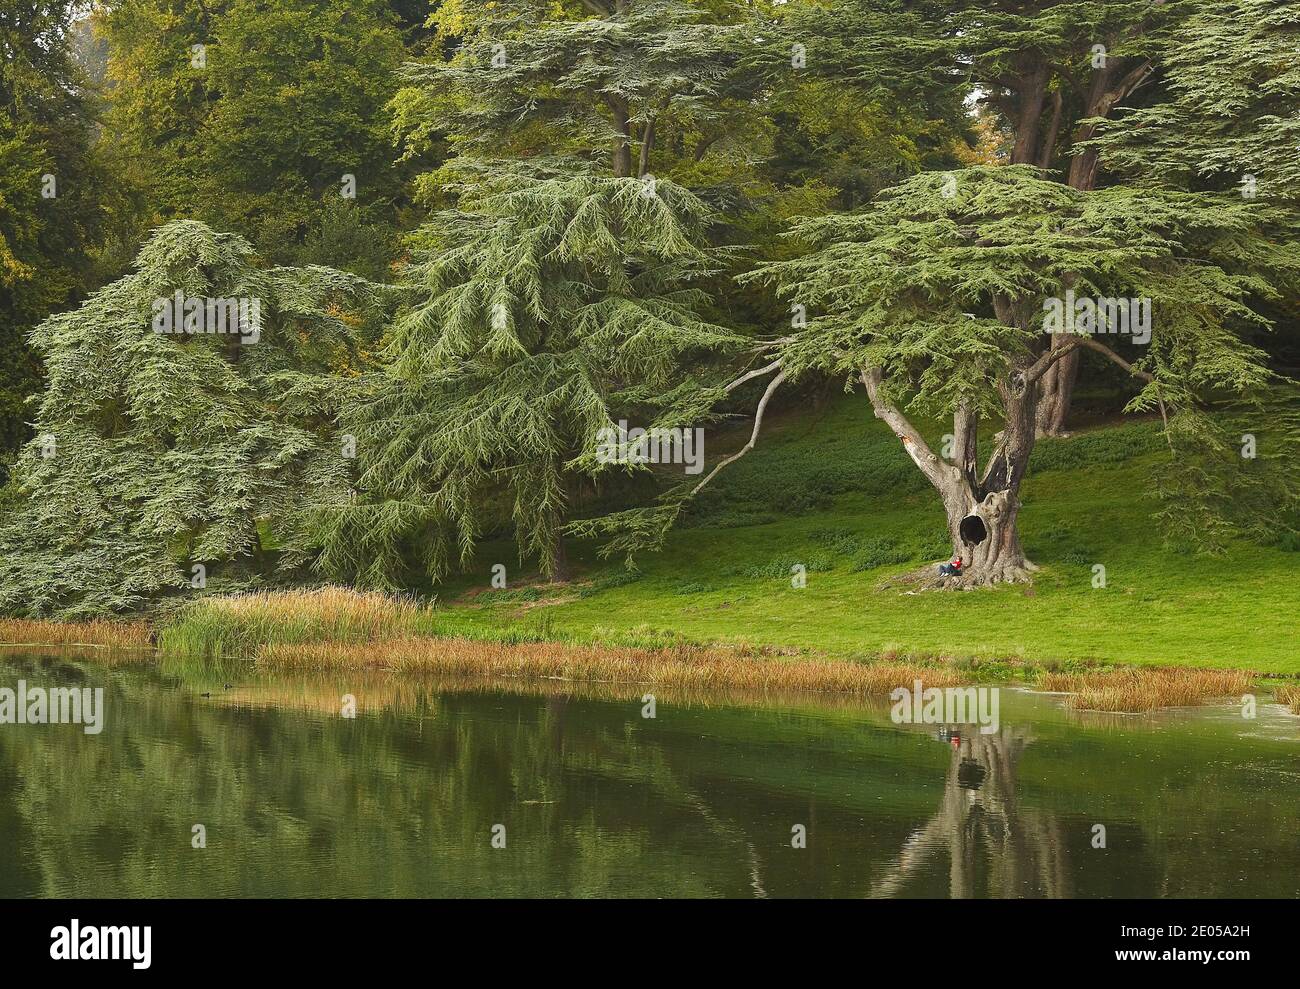 GREAT BRITAIN / England /Blenheim Palace /Person relaxes beside tree next to lake. Stock Photo